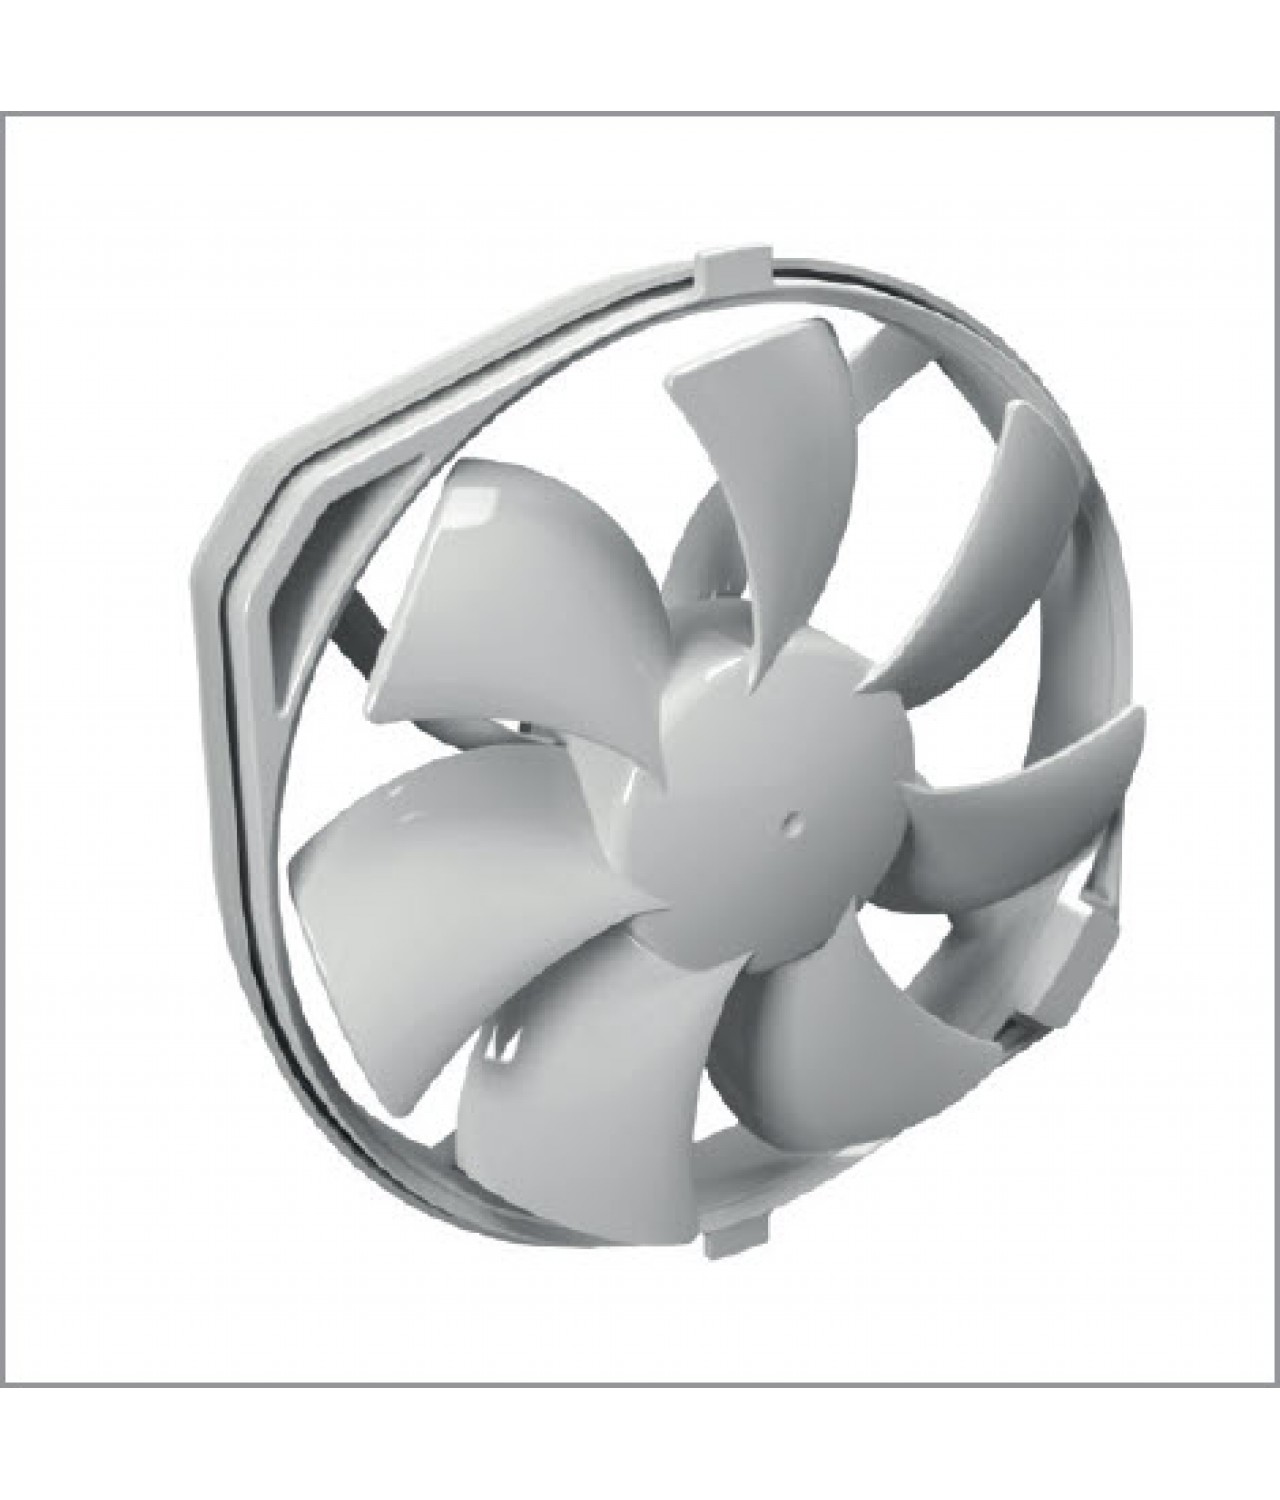 @max bathroom fan impeller with noise attenuating gaskets